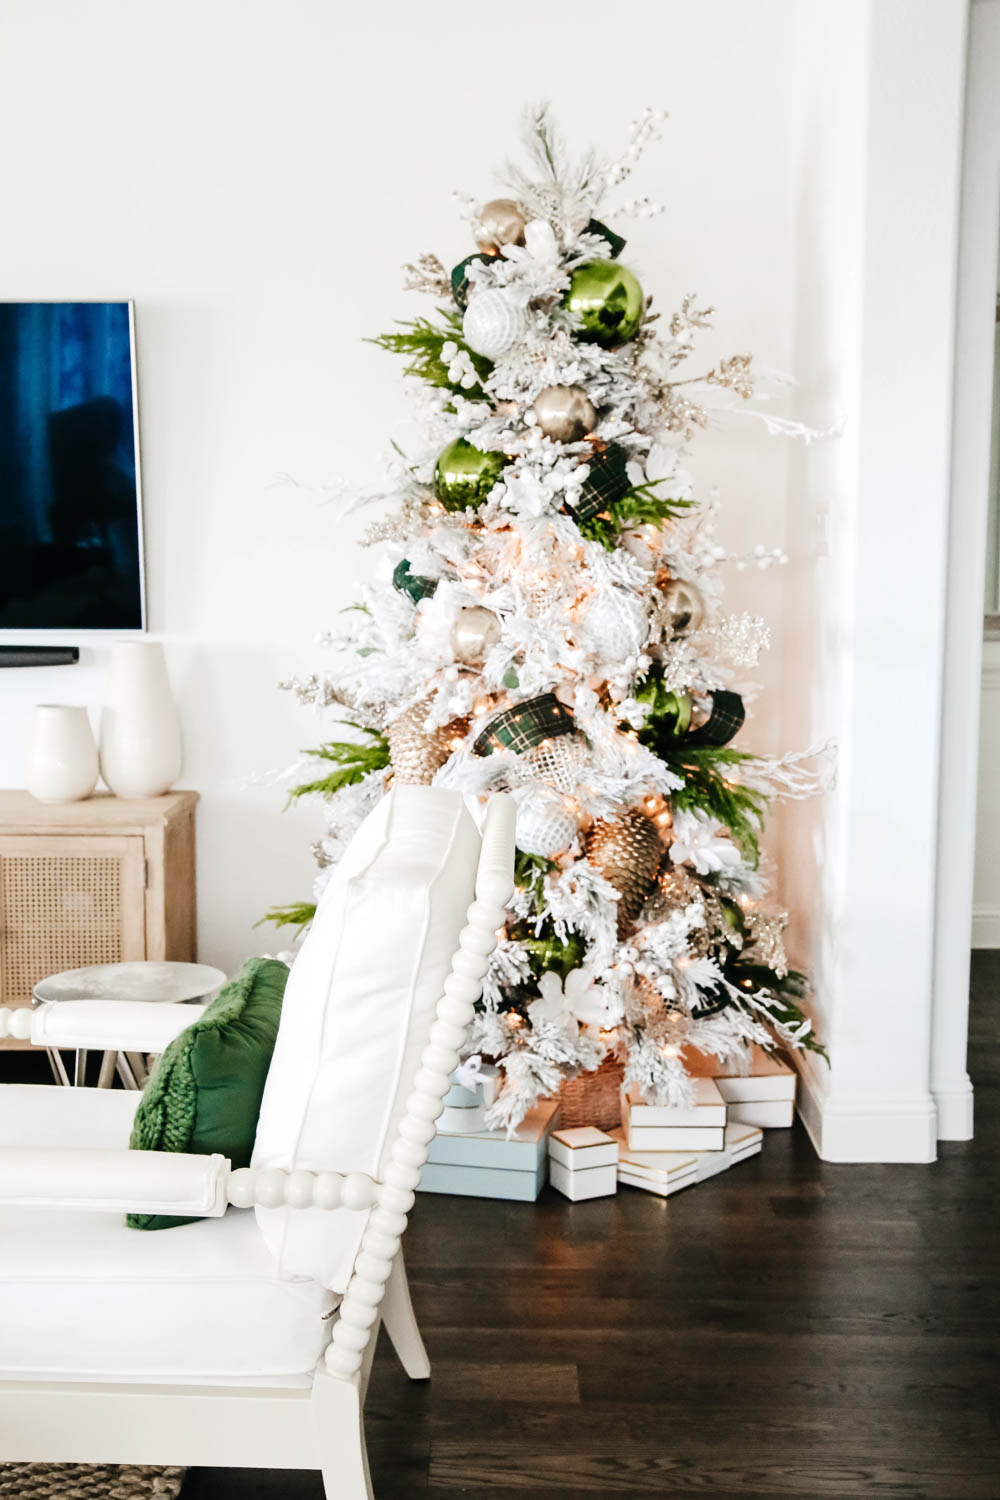 The Best Christmas Decorations on Pinterest - living after midnite